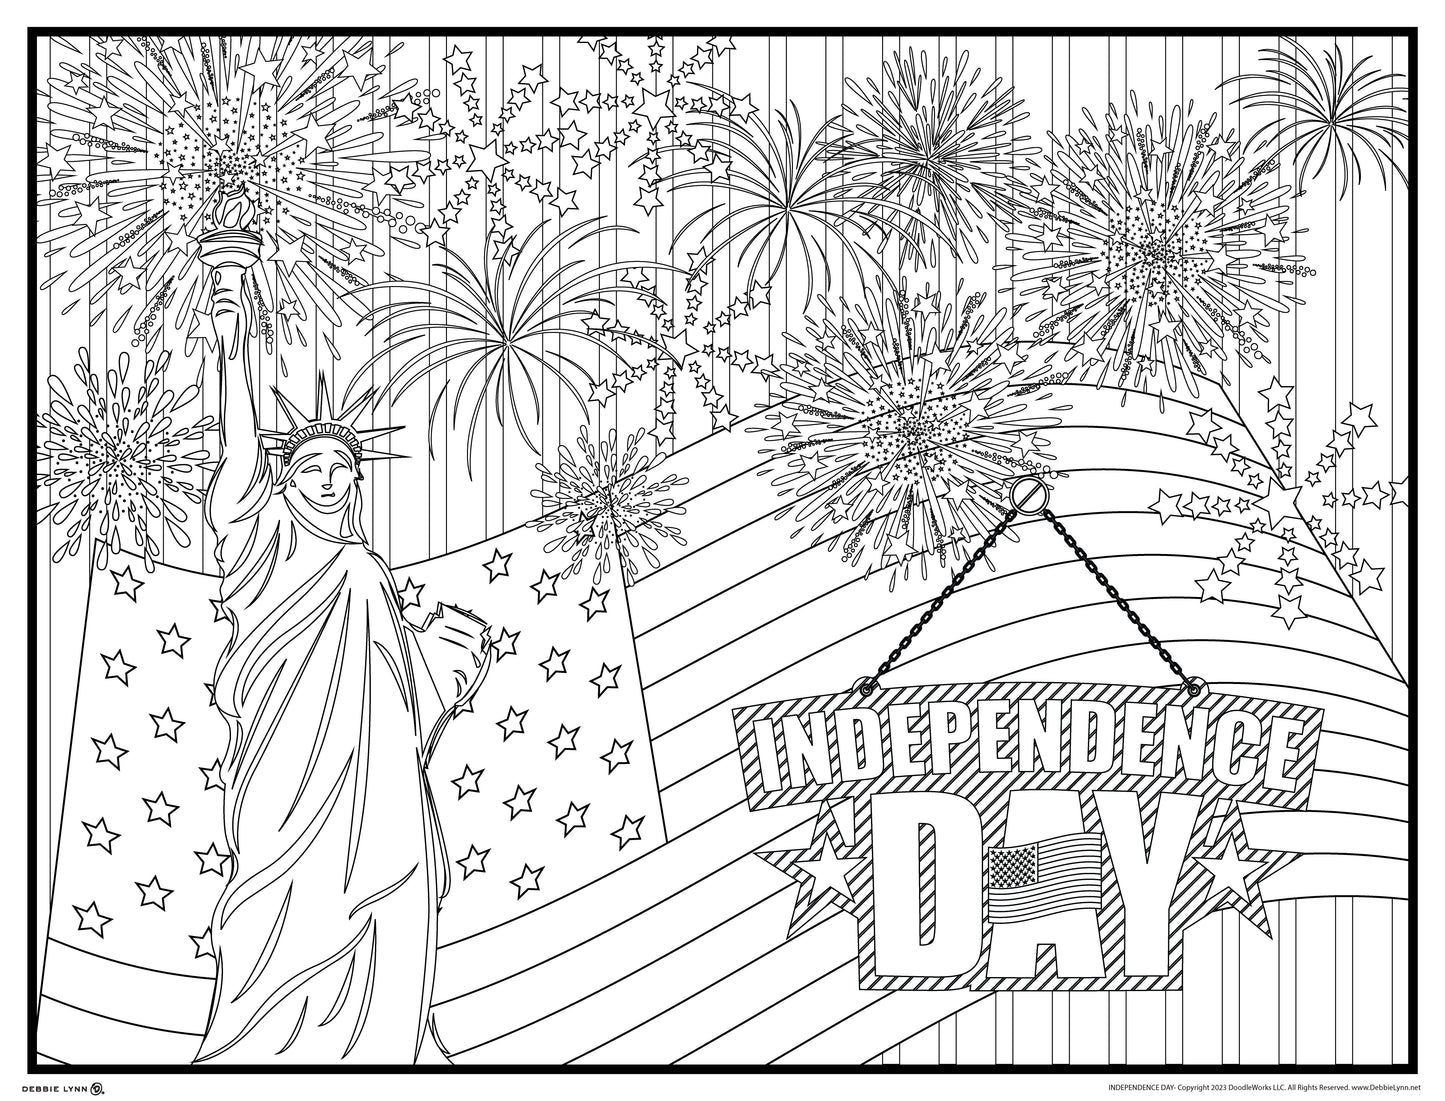 Independence Day Personalized Giant Coloring Poster 46"x60"